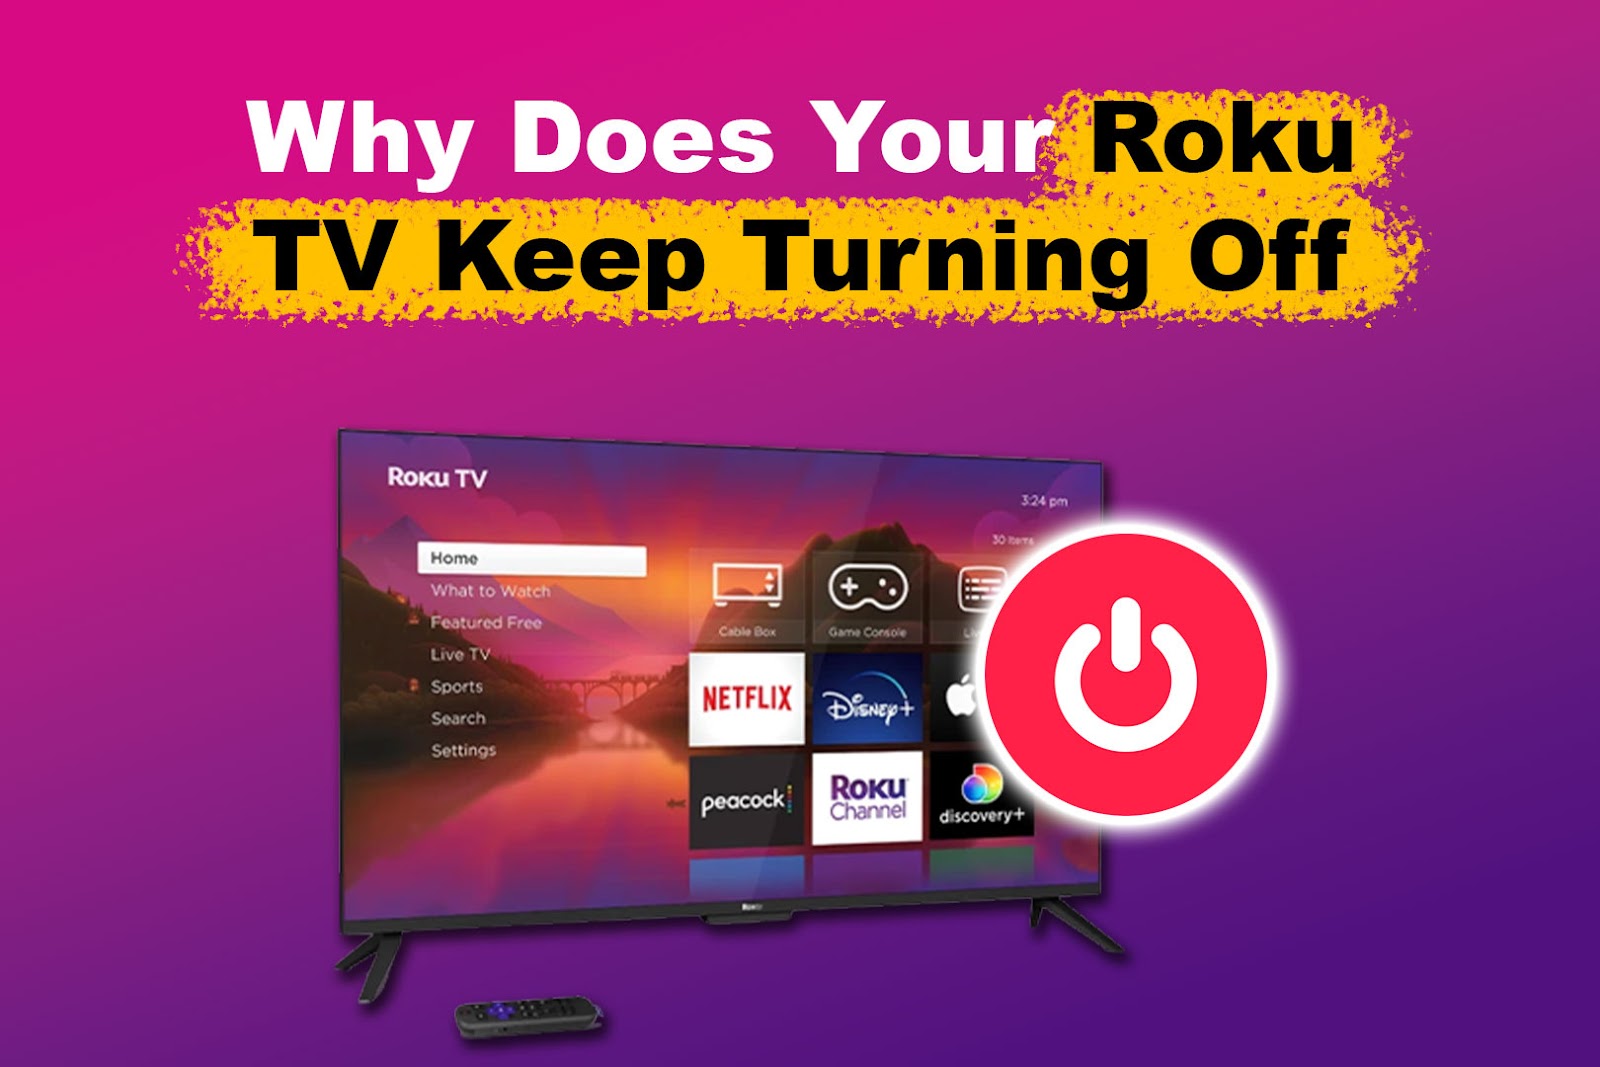 Why Does Your Roku TV Keep Turning Off